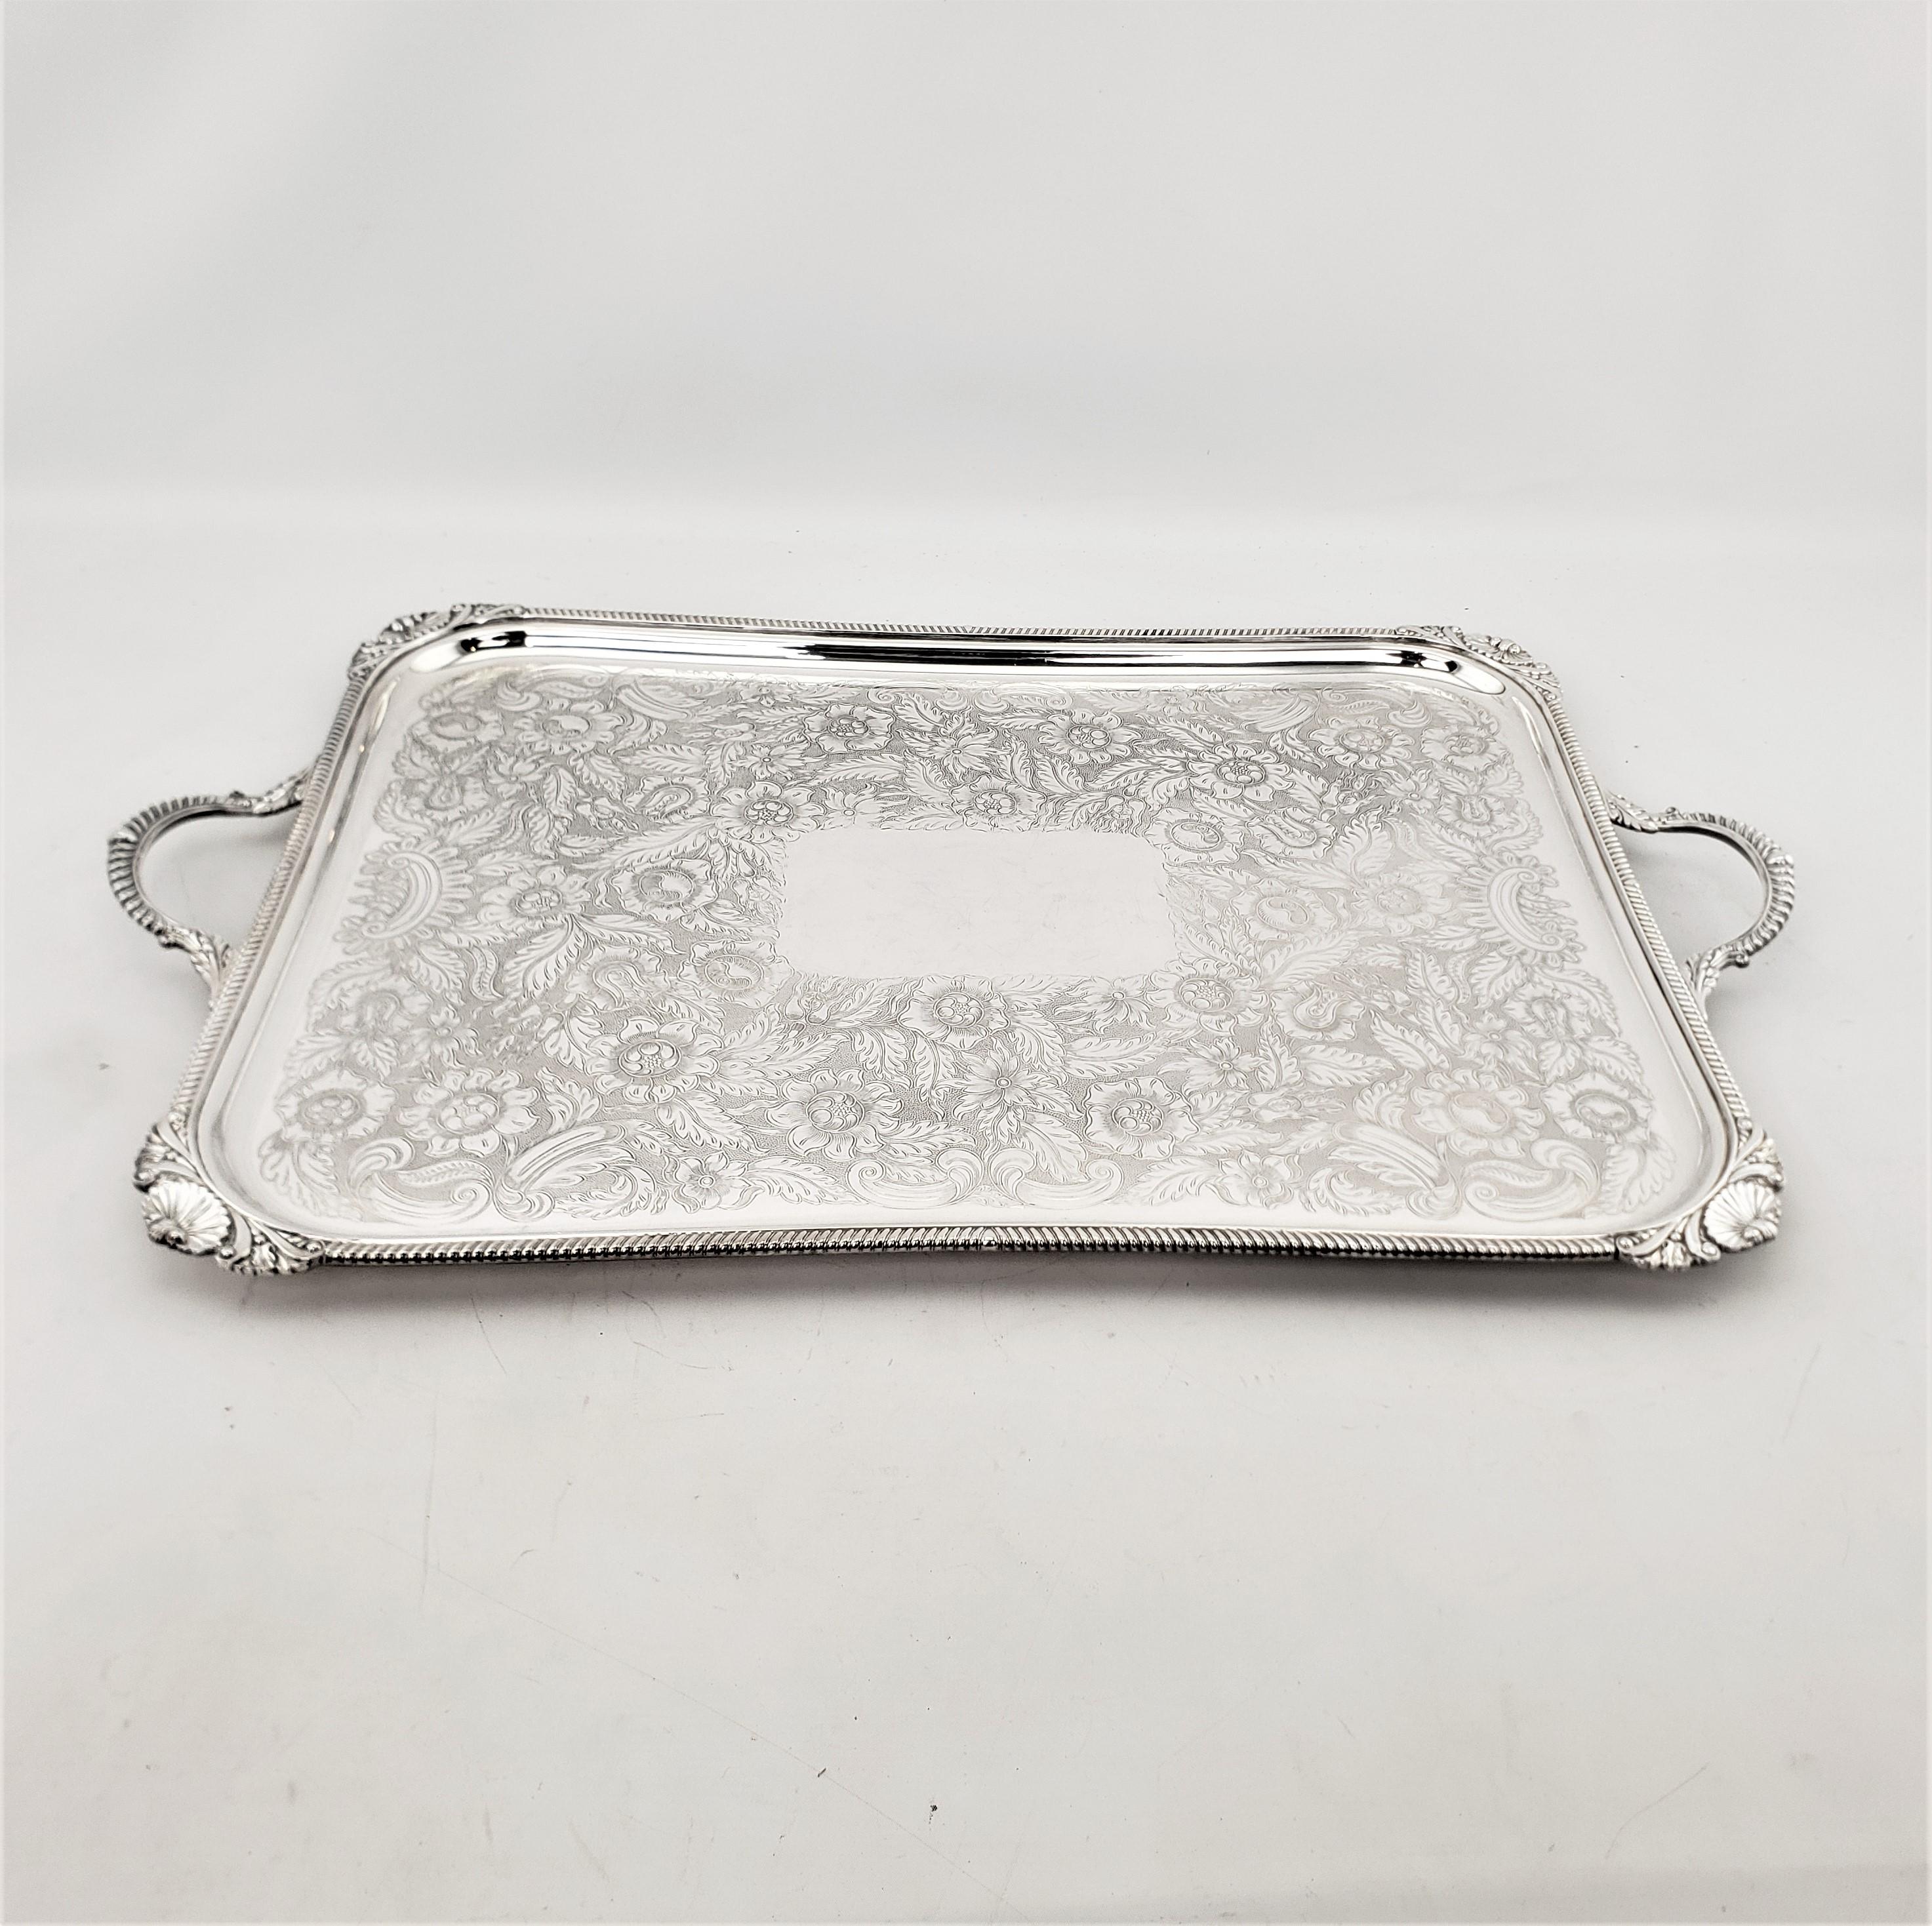 Machine-Made Antique Birks Large Silver Plated Rectangular Serving Tray with Floral Engraving For Sale